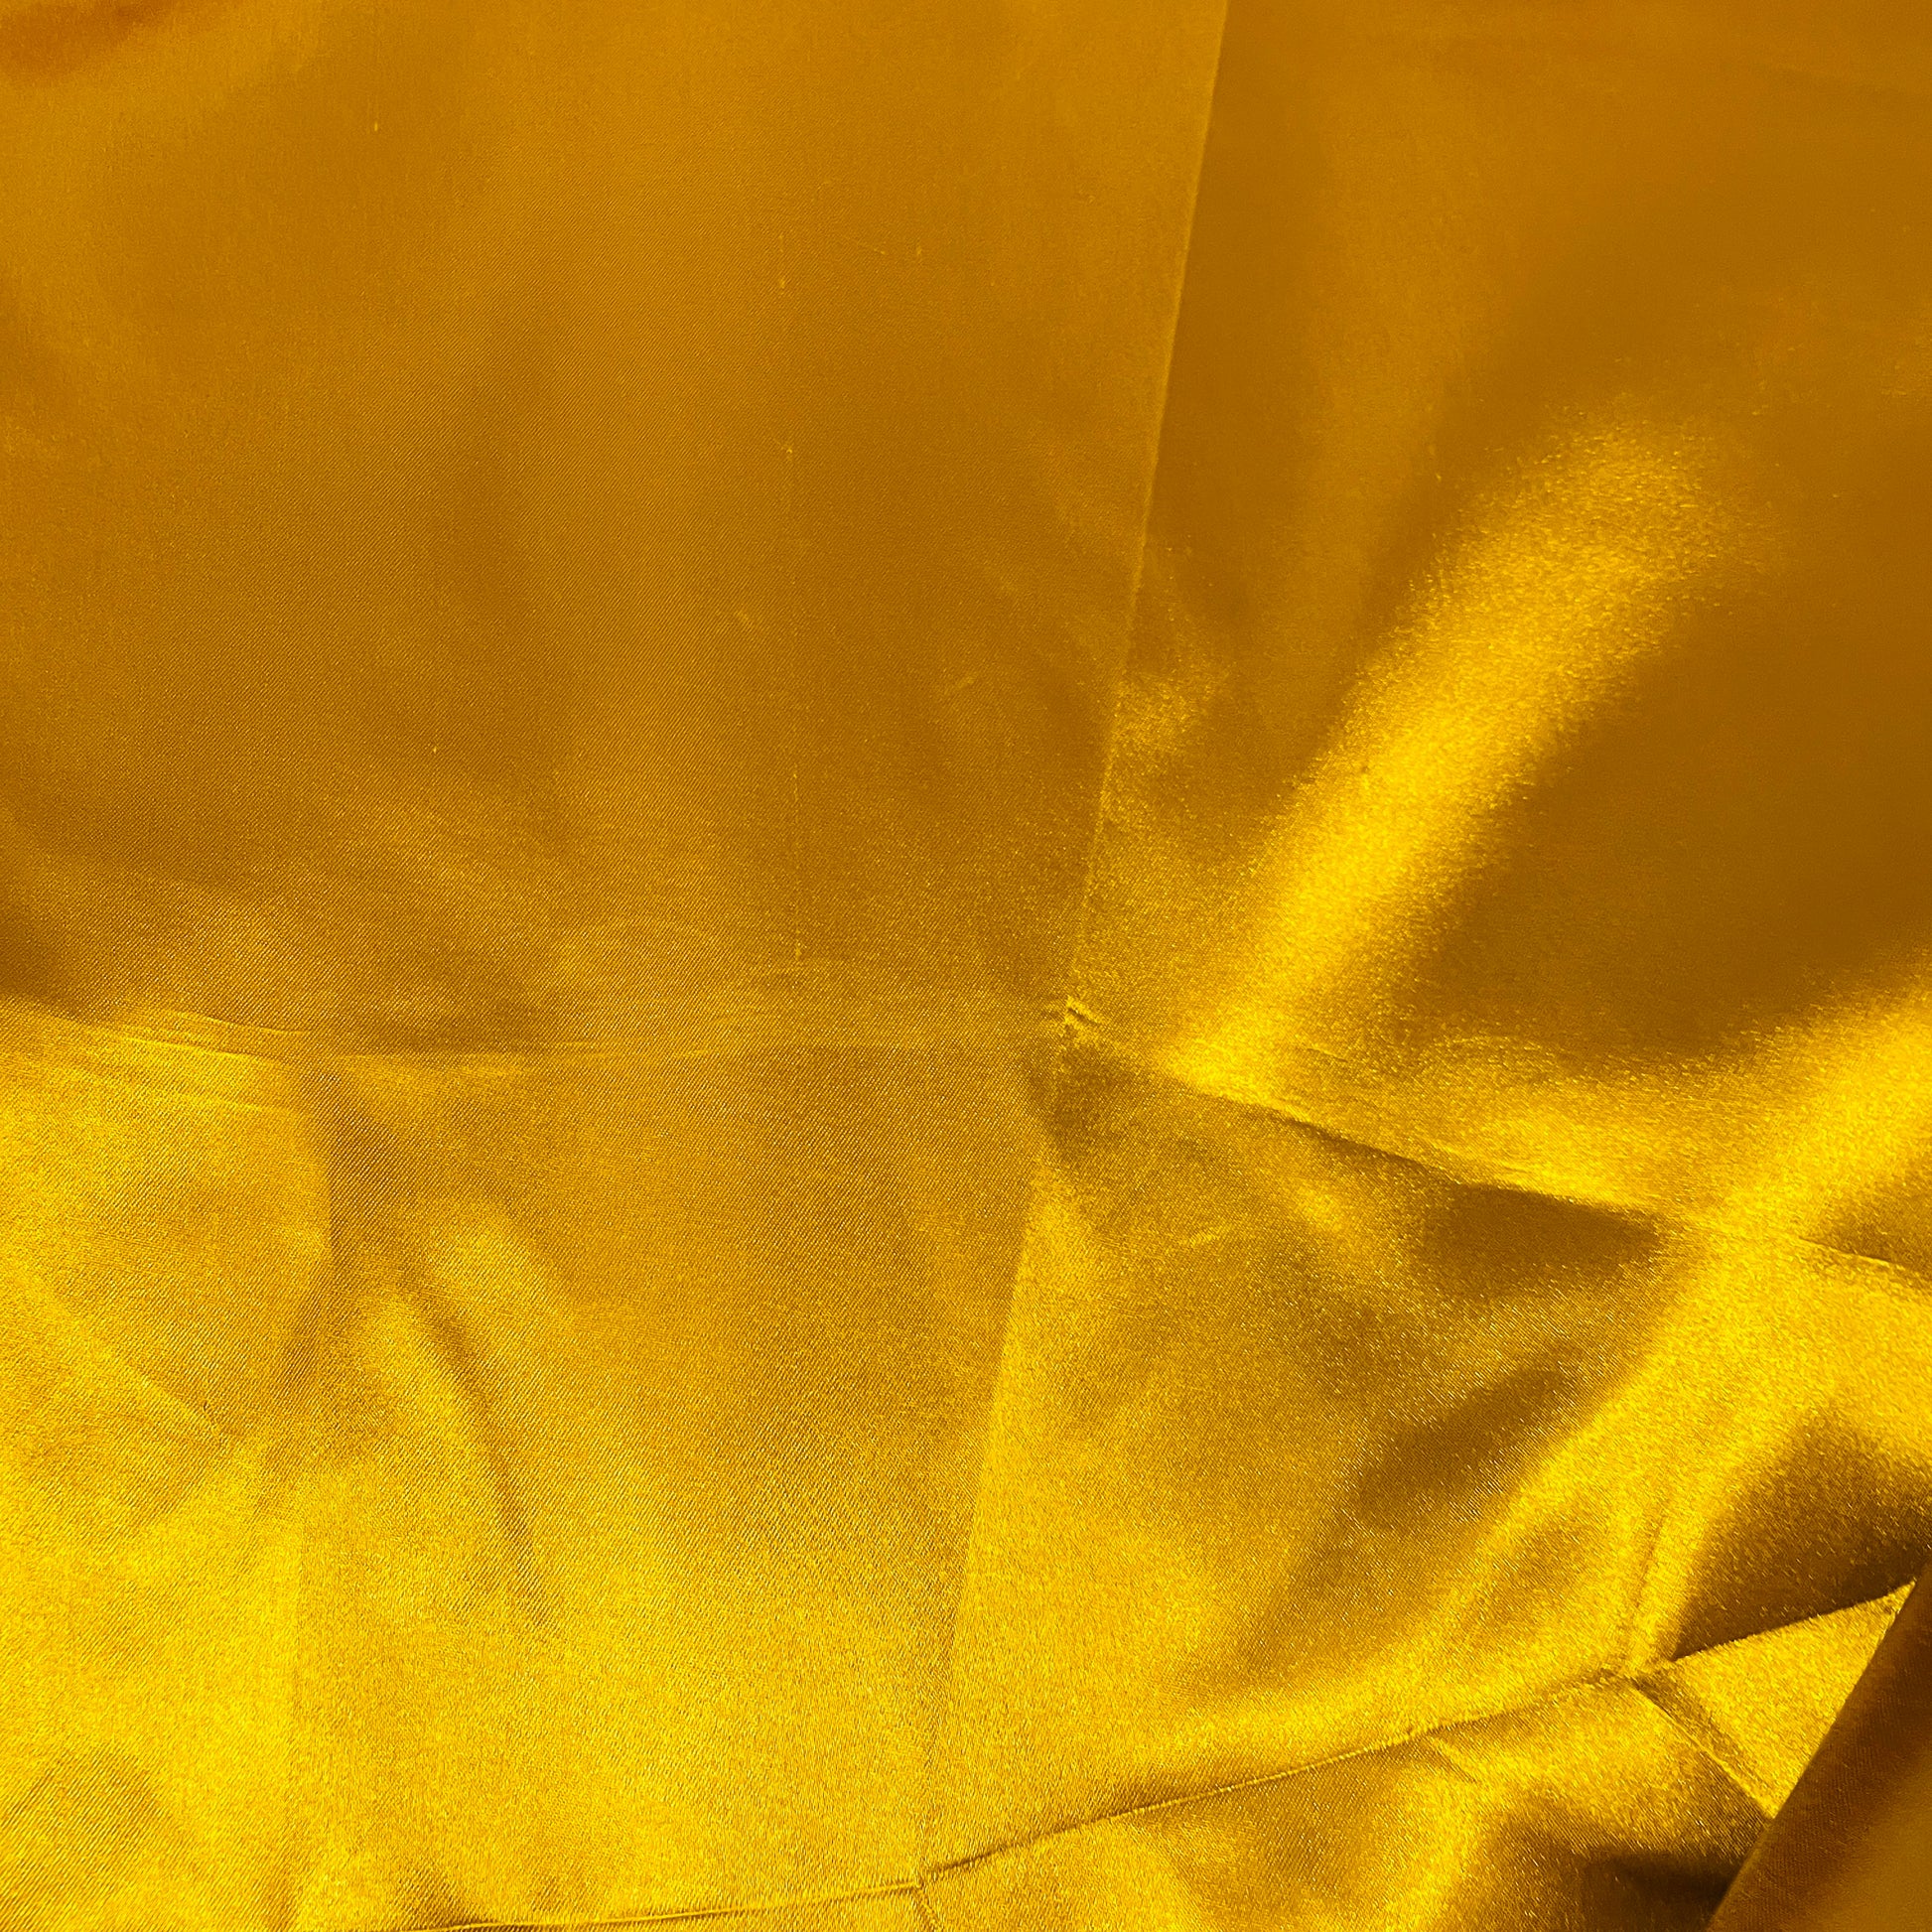 Golden Tan Silky Solid Lightweight Satin Fabric | Special Occasion | Lining  | 100% Polyester | Clothing and Apparel | 60 inch Wide | Sold By the Yard